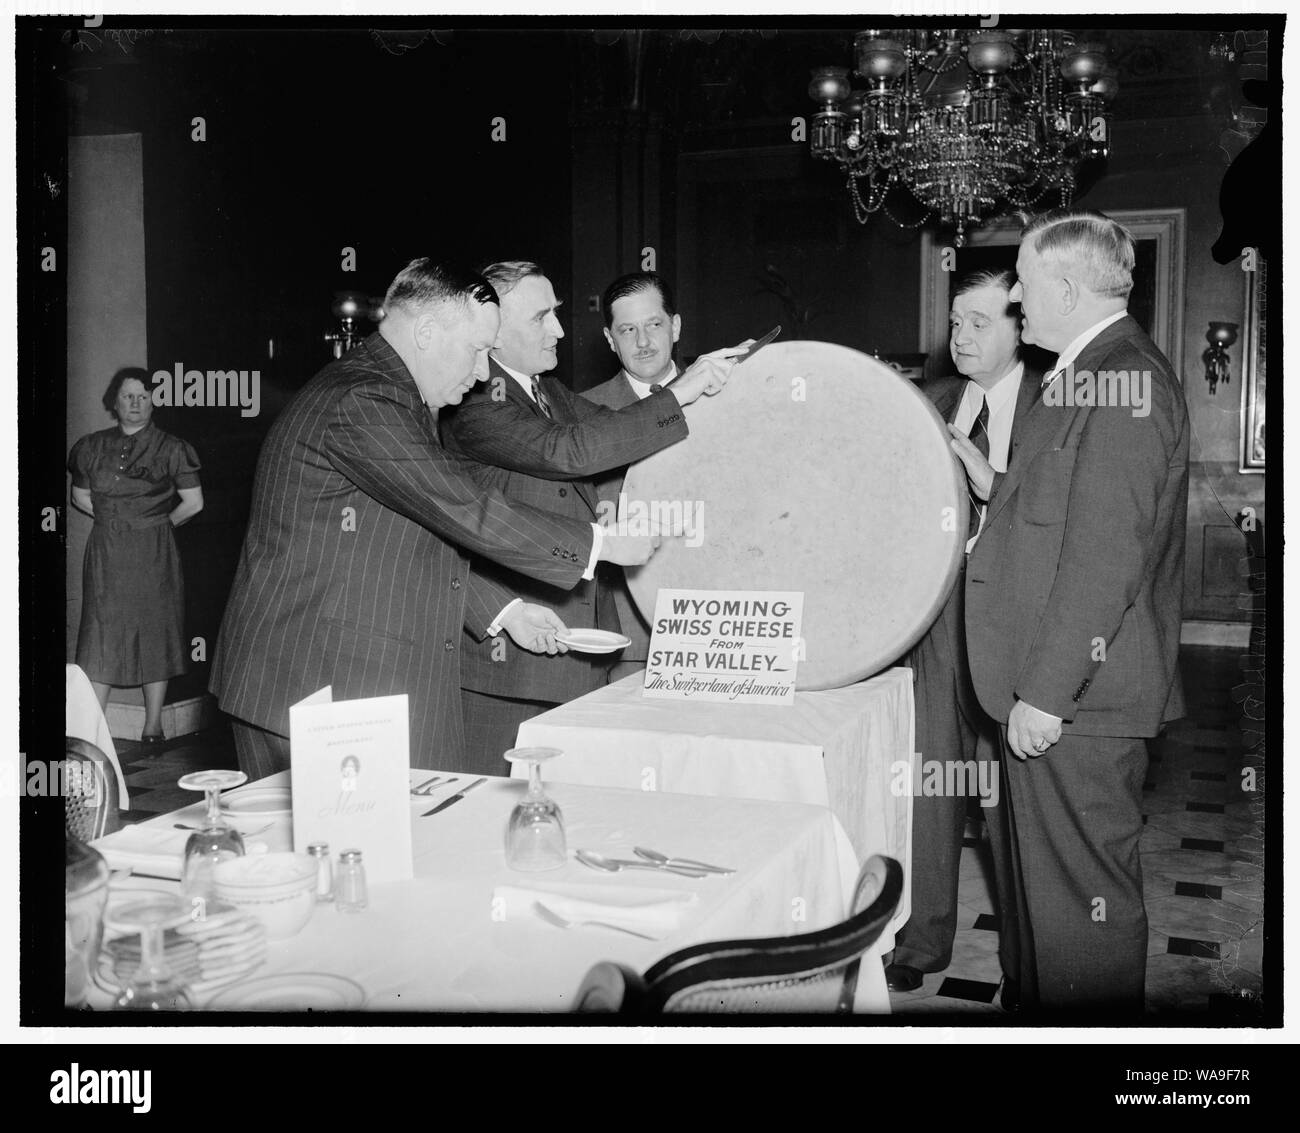 Cheese party for statesmen. Washington, D.C., June 4. The famous swiss cheese from The Star Valley of Wyoming was the piece of resistance at the Capitol today for the members of Congress and other high government officials hailing from the state. The cheese weighed 250 pounds. Left to right: Rep. Paul R. Greener; Sen. Joseph D. O'Mahoney; Thurman Arnold, Assistant Attorney General; Fred W. Johnson, Commisioner, General Land office; and Senator H.H. Schwartz, 6/4/38 Stock Photo